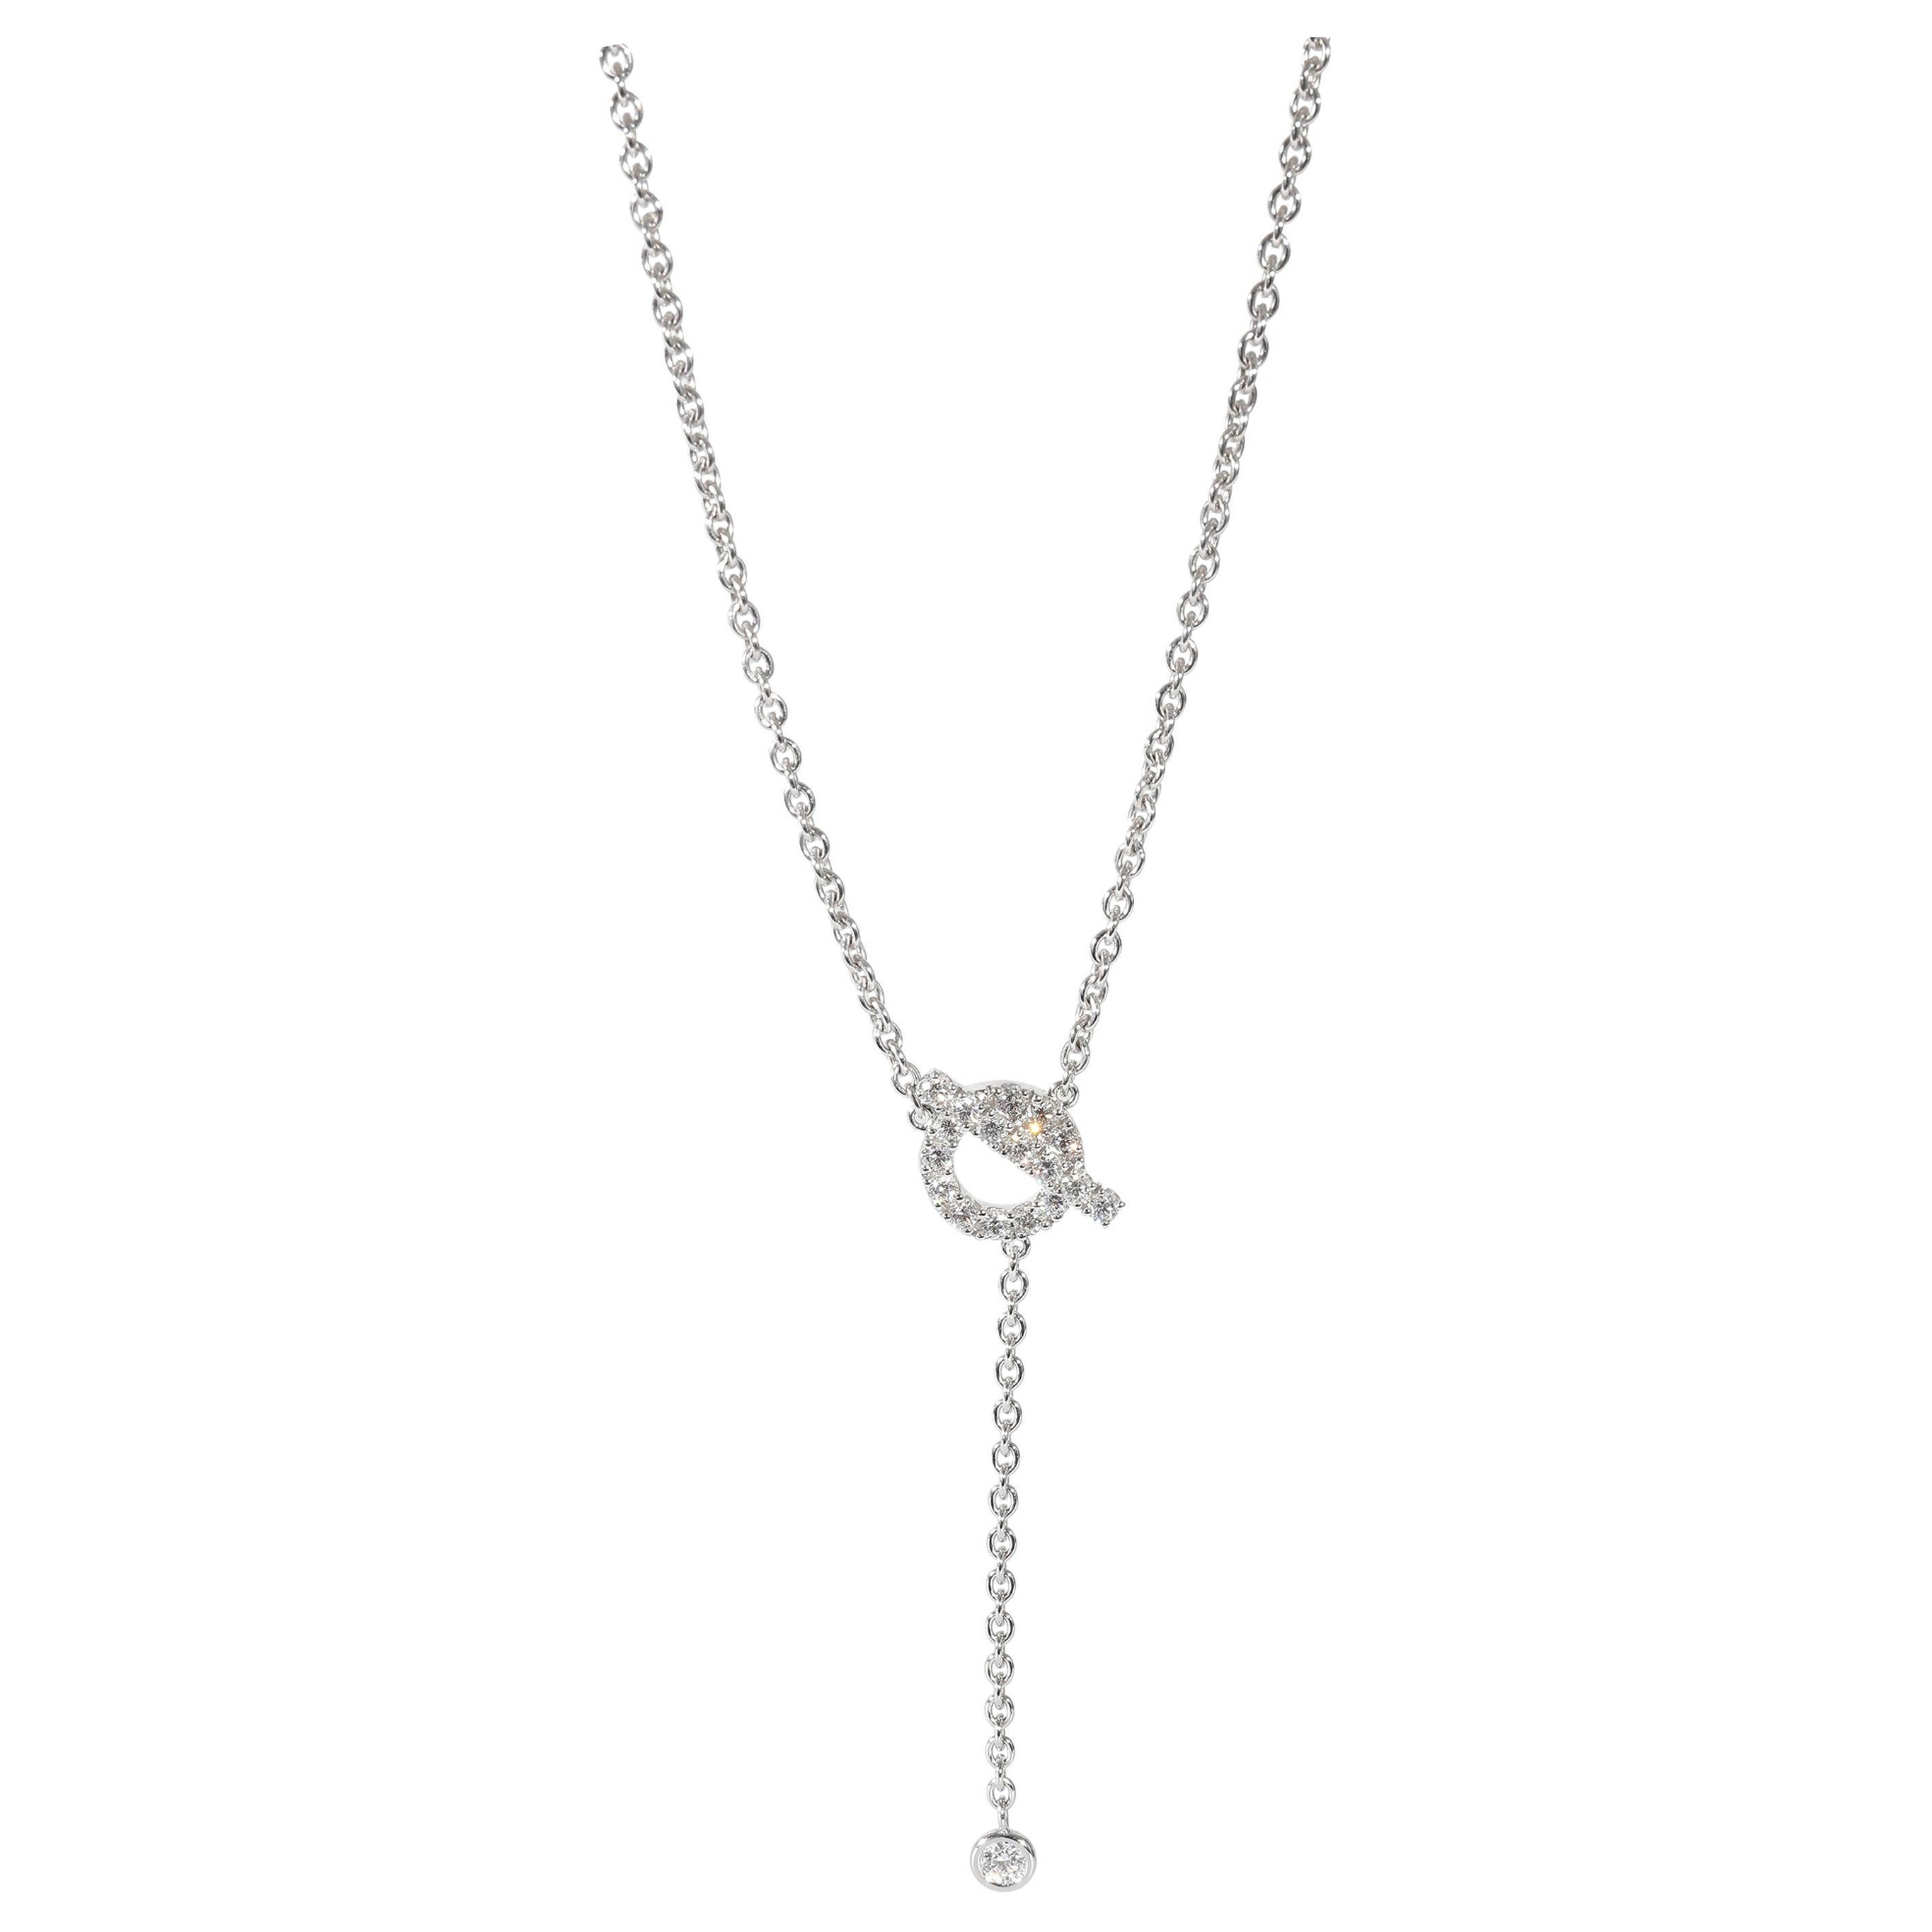 Hermès Finesse Fashion Necklace in 18k White Gold 0.55 CTW For Sale